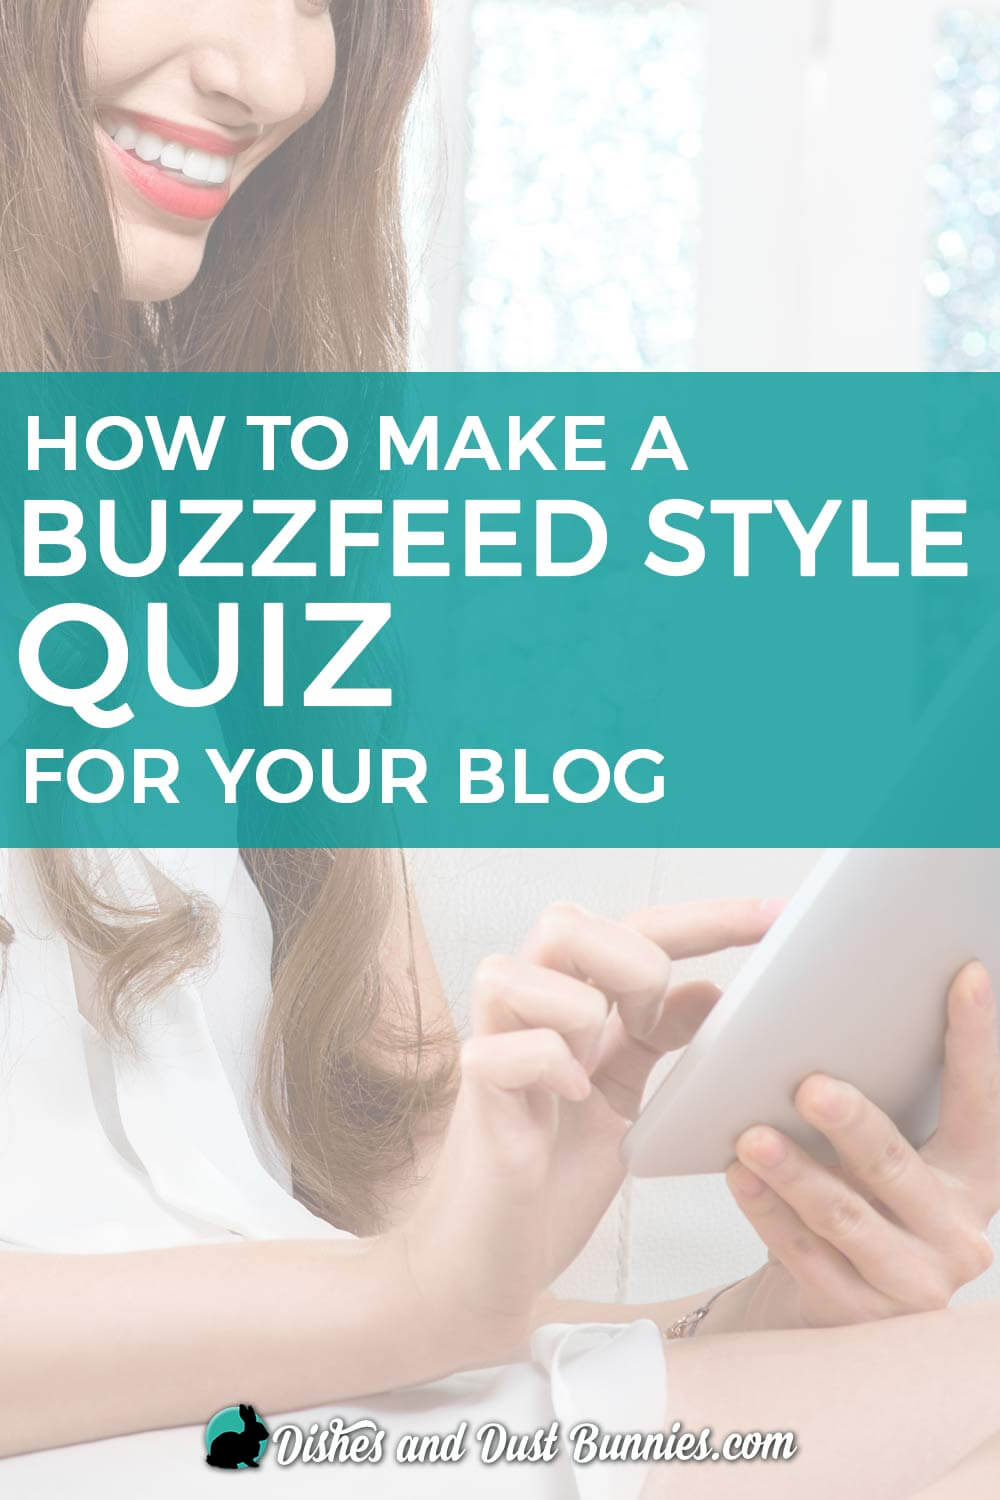 How to make a Buzzfeed Style Quiz for your Blog - from dishesanddustbunnies.com